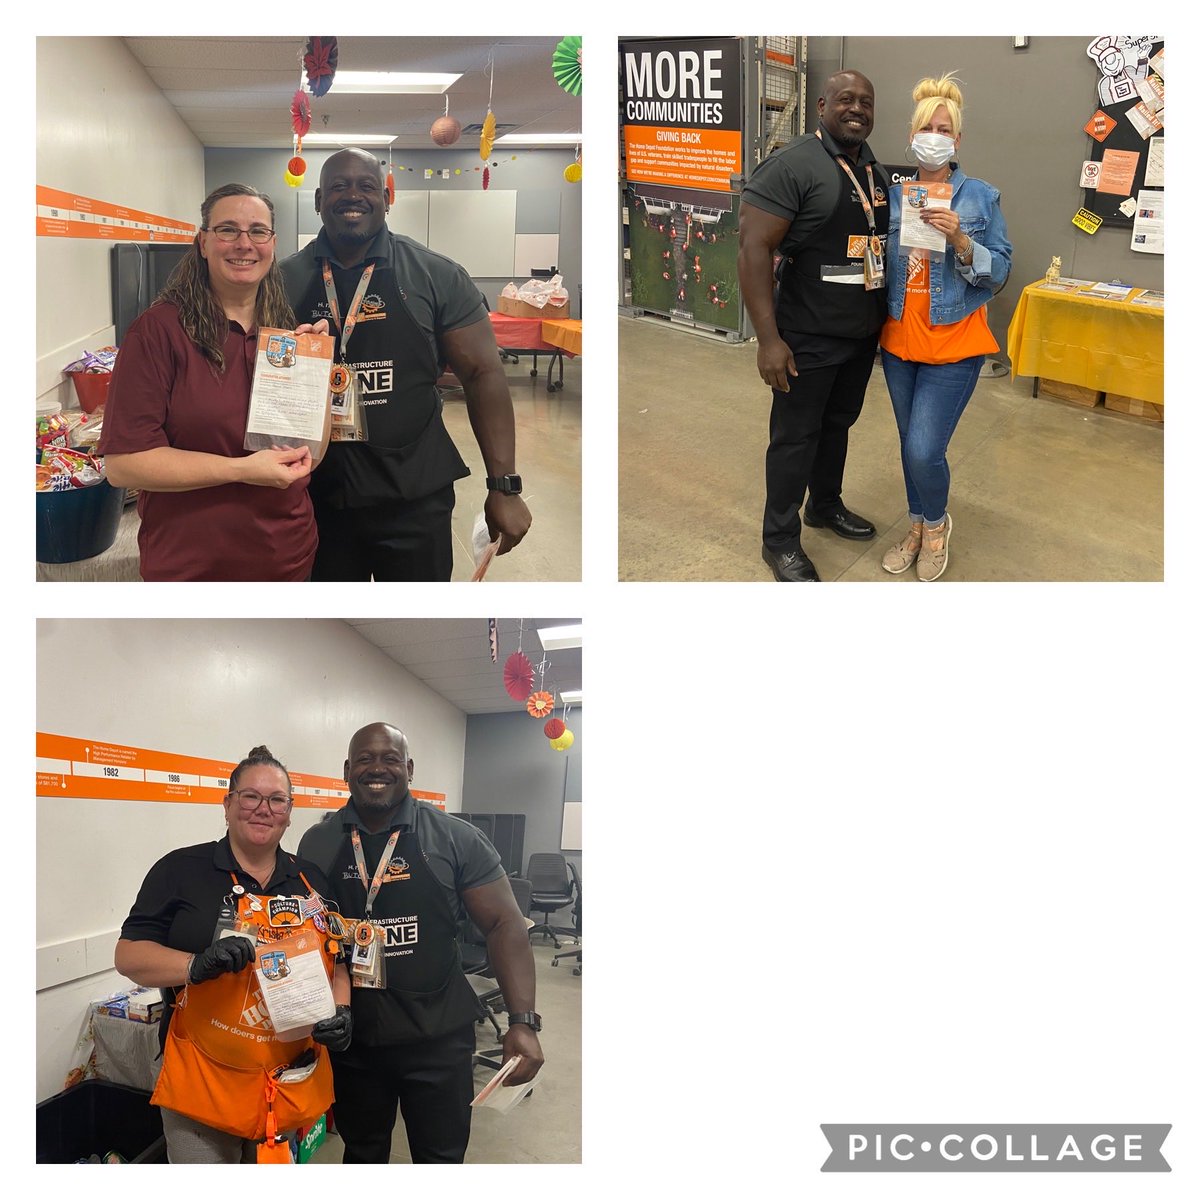 Handing out some well deserved recognition at ST4166. Thank you ASDS Sharon, Head Cashier LuLu and ASM Krista!! ⁦@jonbaumann304⁩ ⁦@tommybennetthd⁩ ⁦@RBusdeker⁩